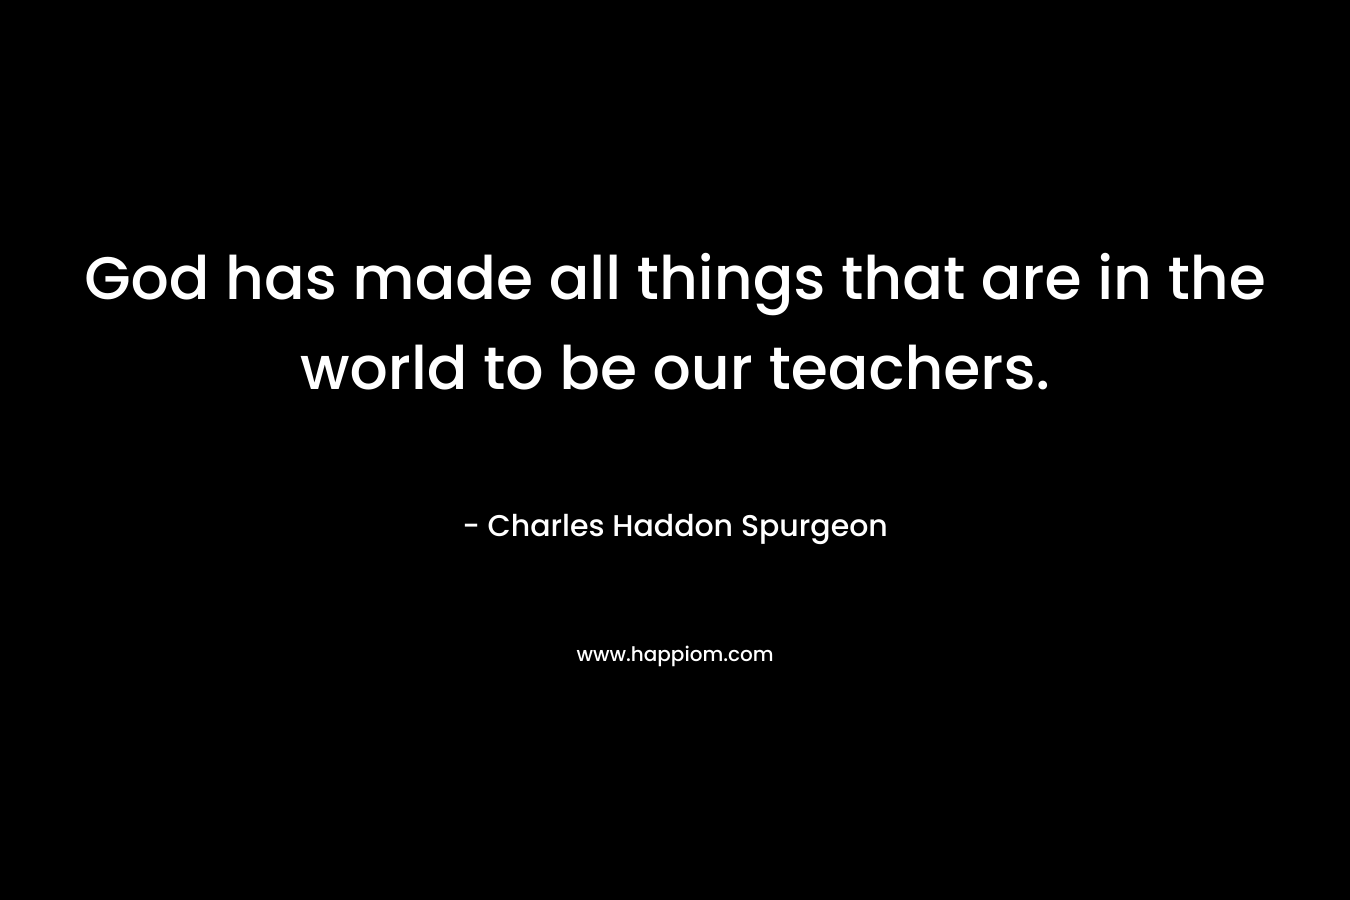 God has made all things that are in the world to be our teachers. – Charles Haddon Spurgeon